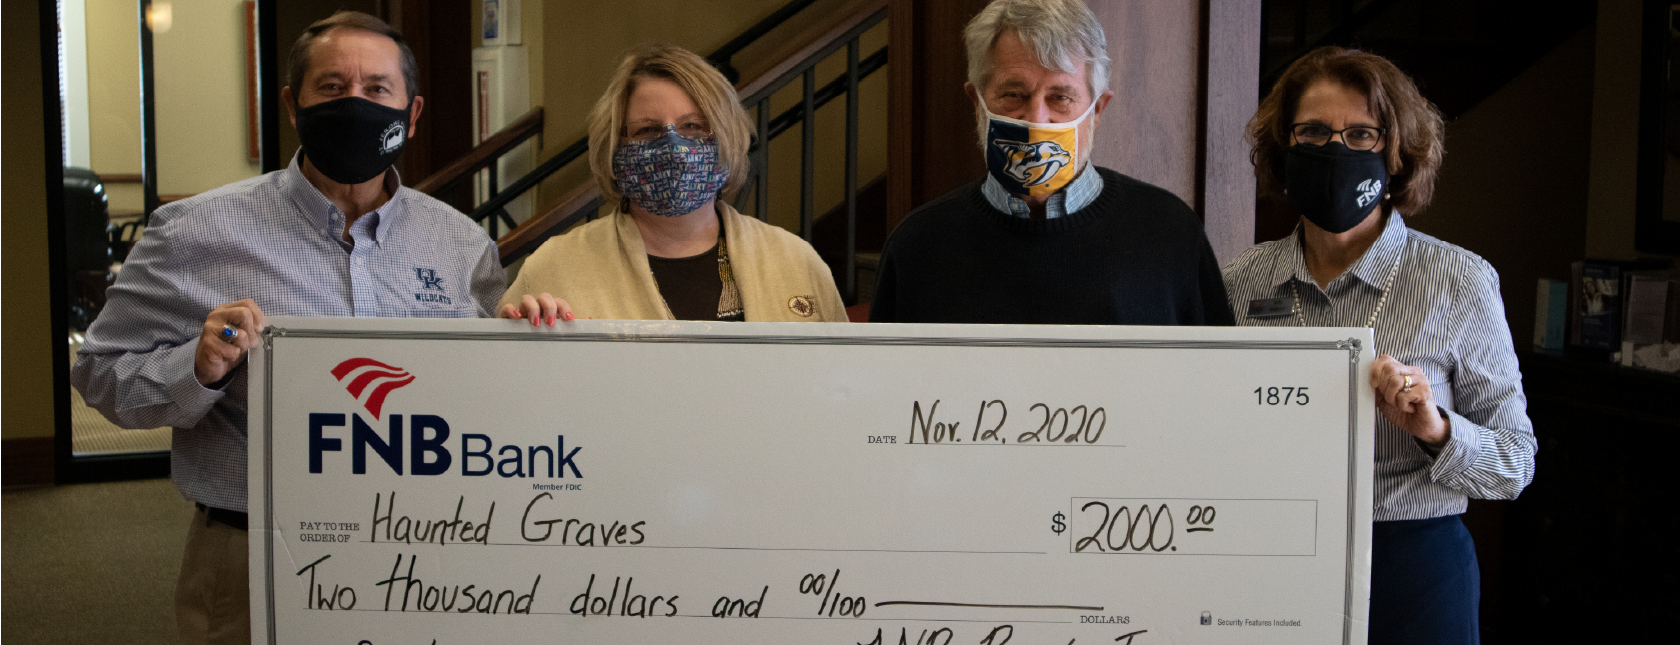 FNB Makes $2000 Donation to Mayfield Graves County Tourism Commissions' Haunted Graves Campaign